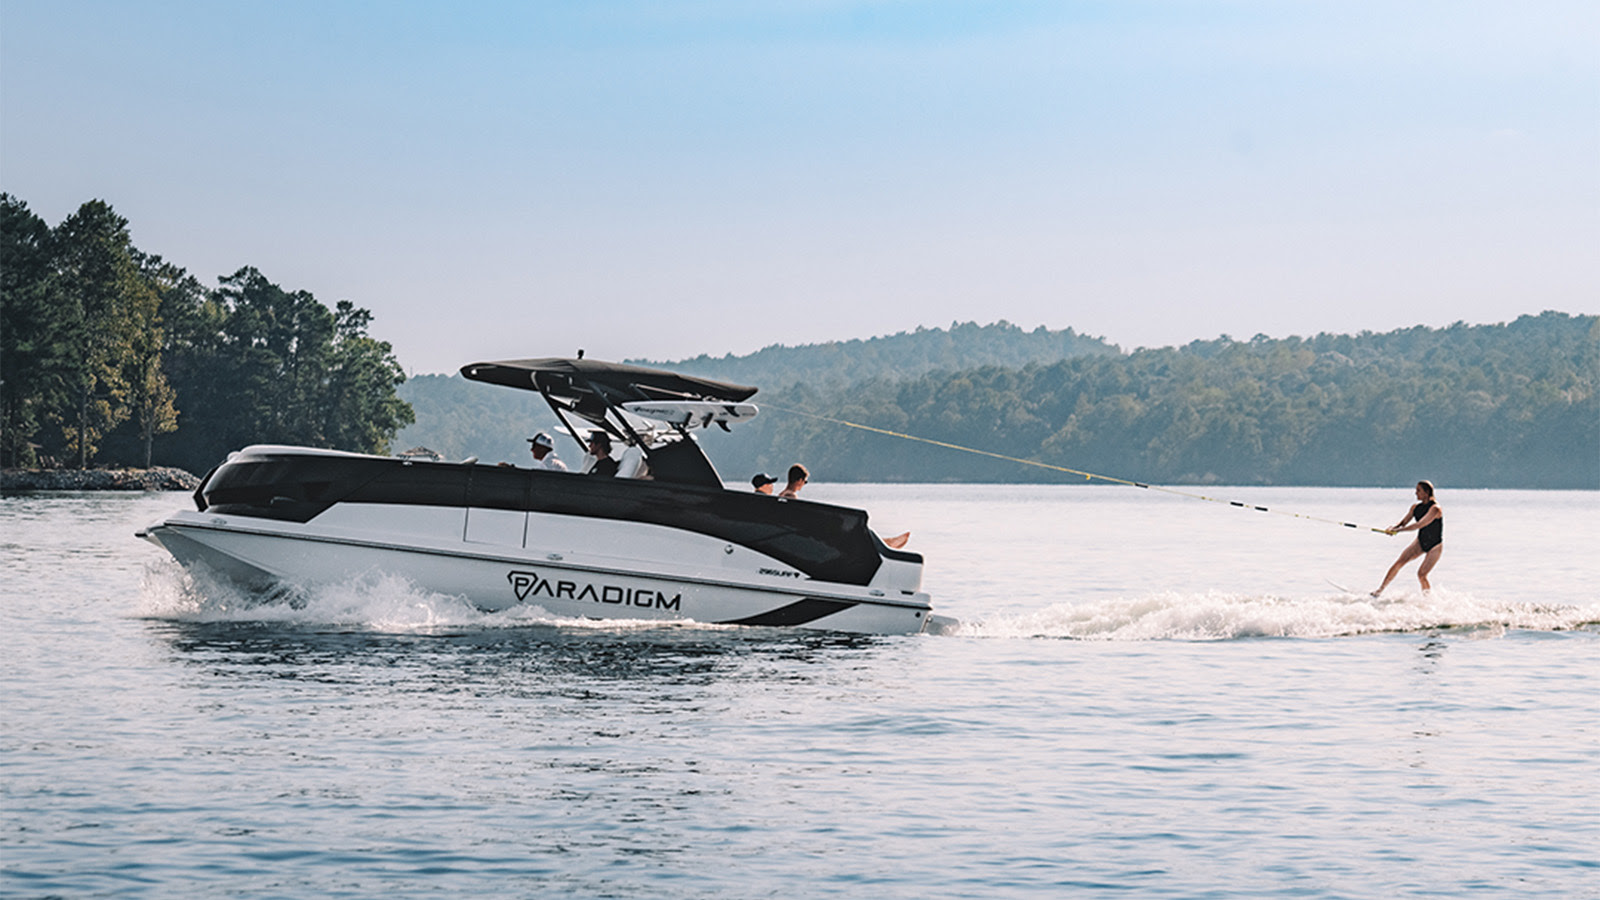 Discover Paradigm Boats and Begin Your New Boating Adventure